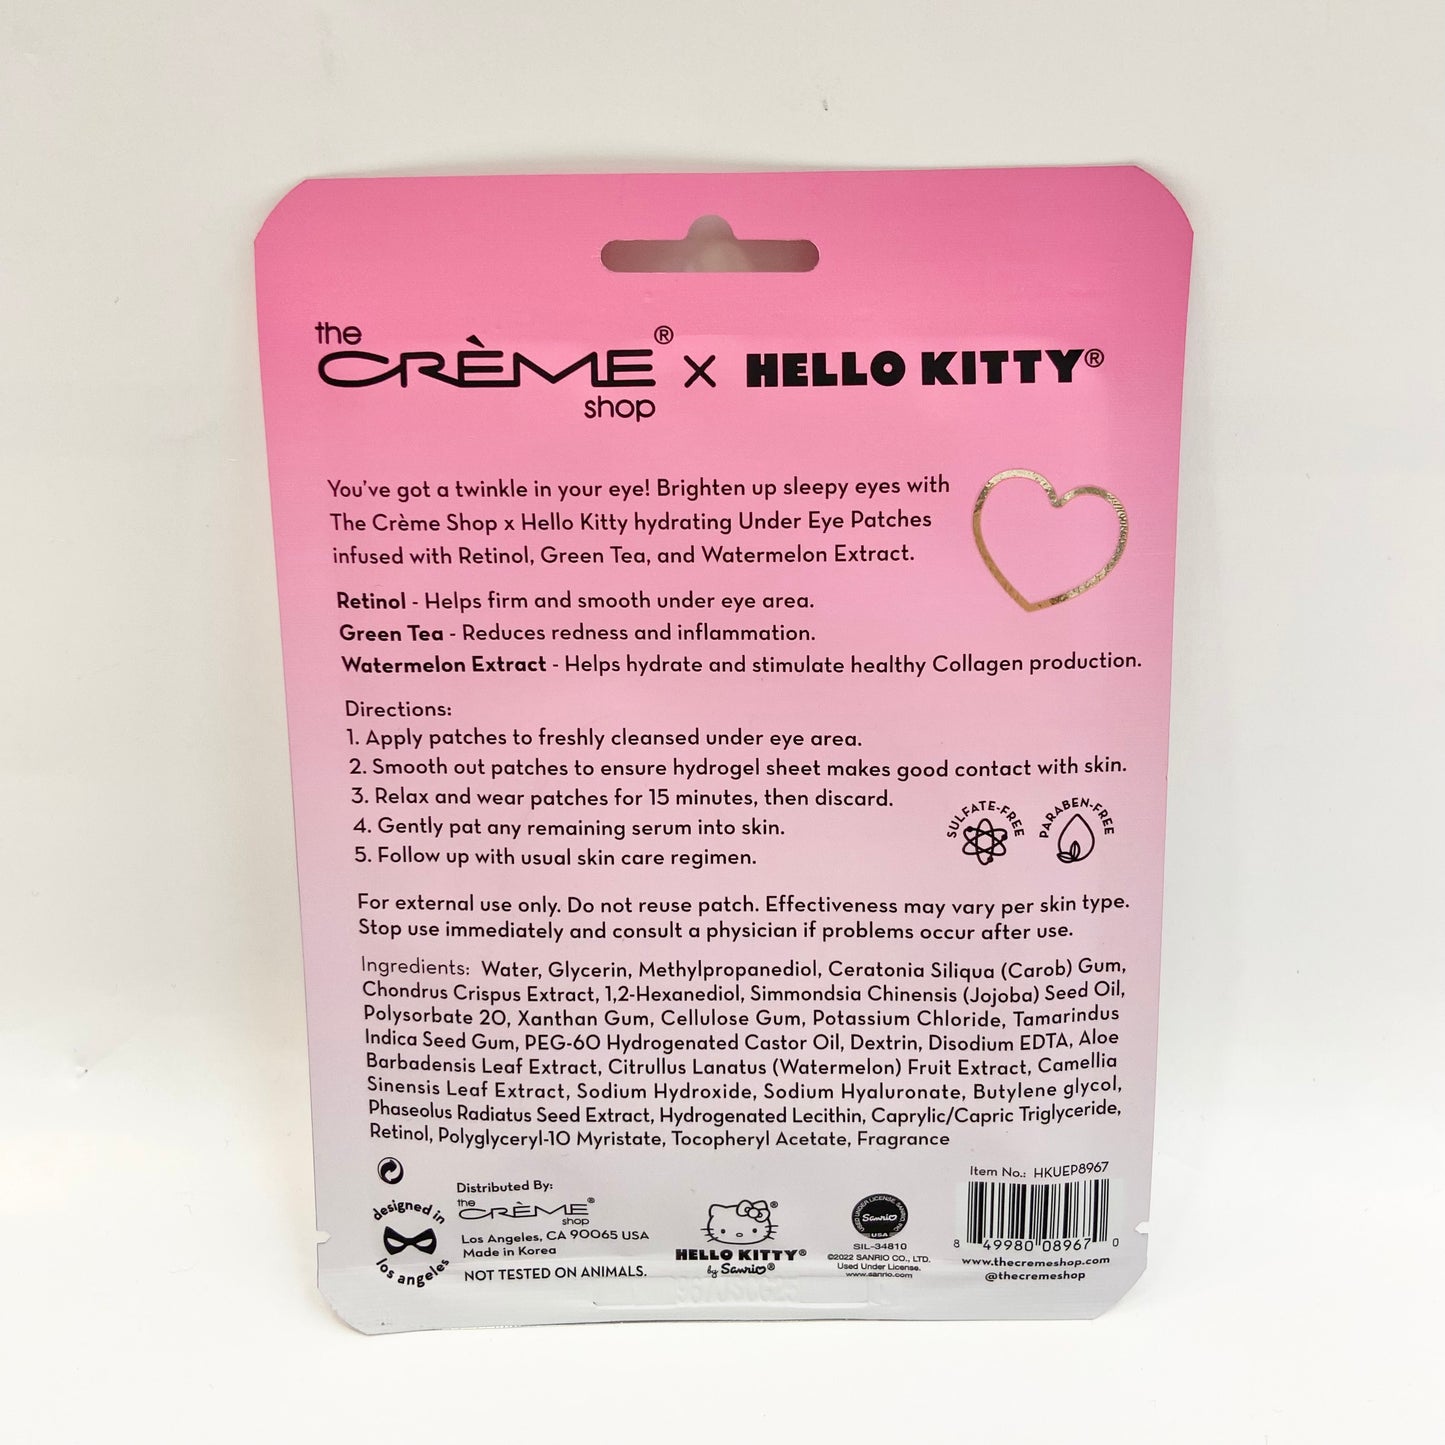 The Creme Shop x Hello Kitty Twinkle Eyes Hydrogel Under Eye Patches